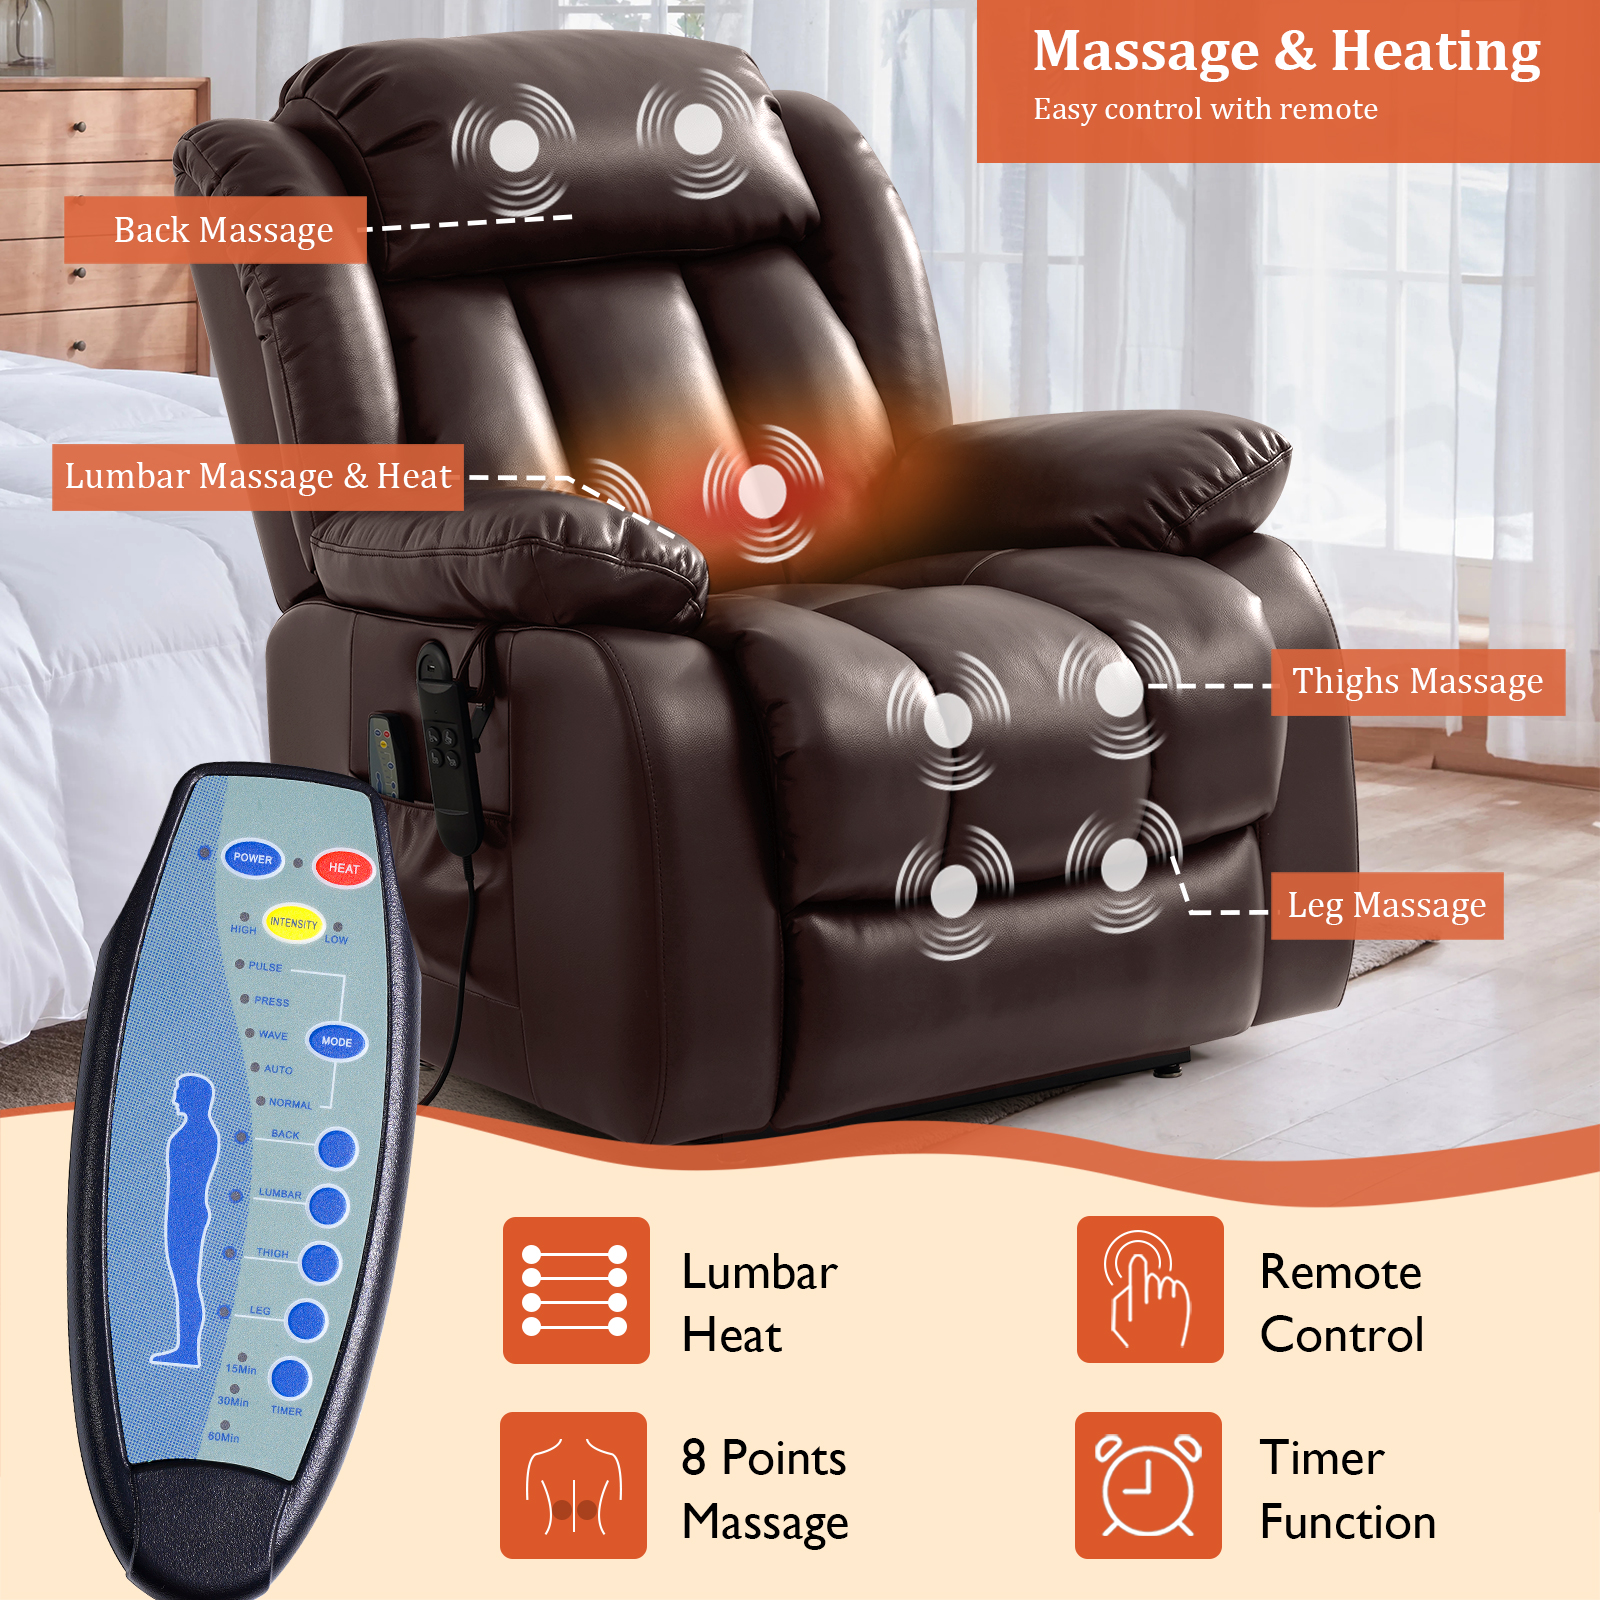 TEKAMON Infinite Position Lift Recliner Chair for Elderly with Heat and Massage Lay Flat Sleeping Leather Dual Motor Power Lift Chair for Living Room (Brown) - image 3 of 12